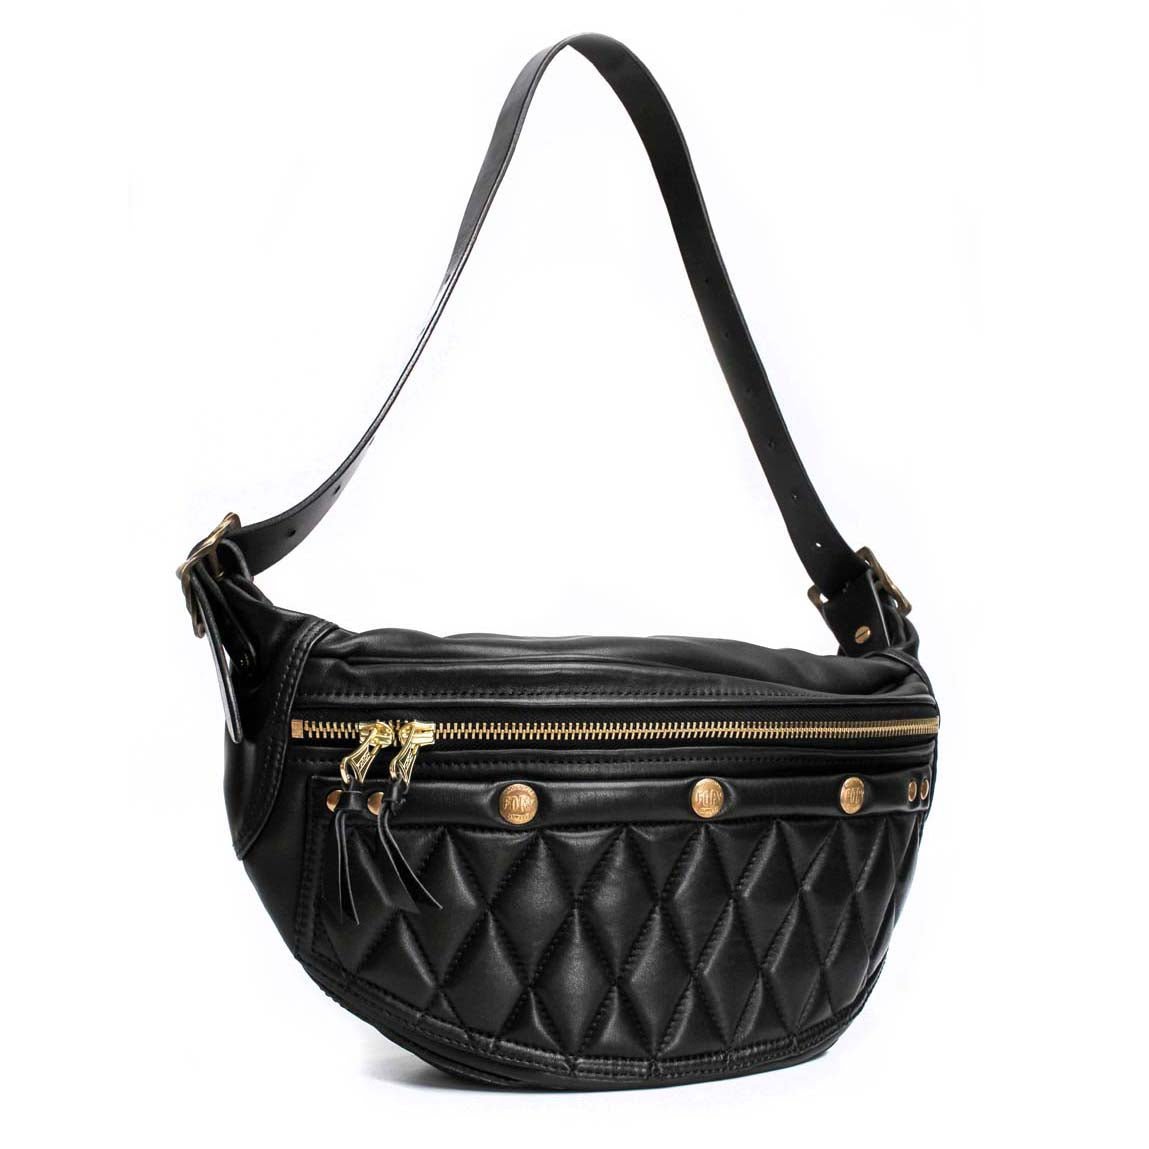 Diamond Quilted Fanny Pack / Crossbody Bag - Fogy Garage